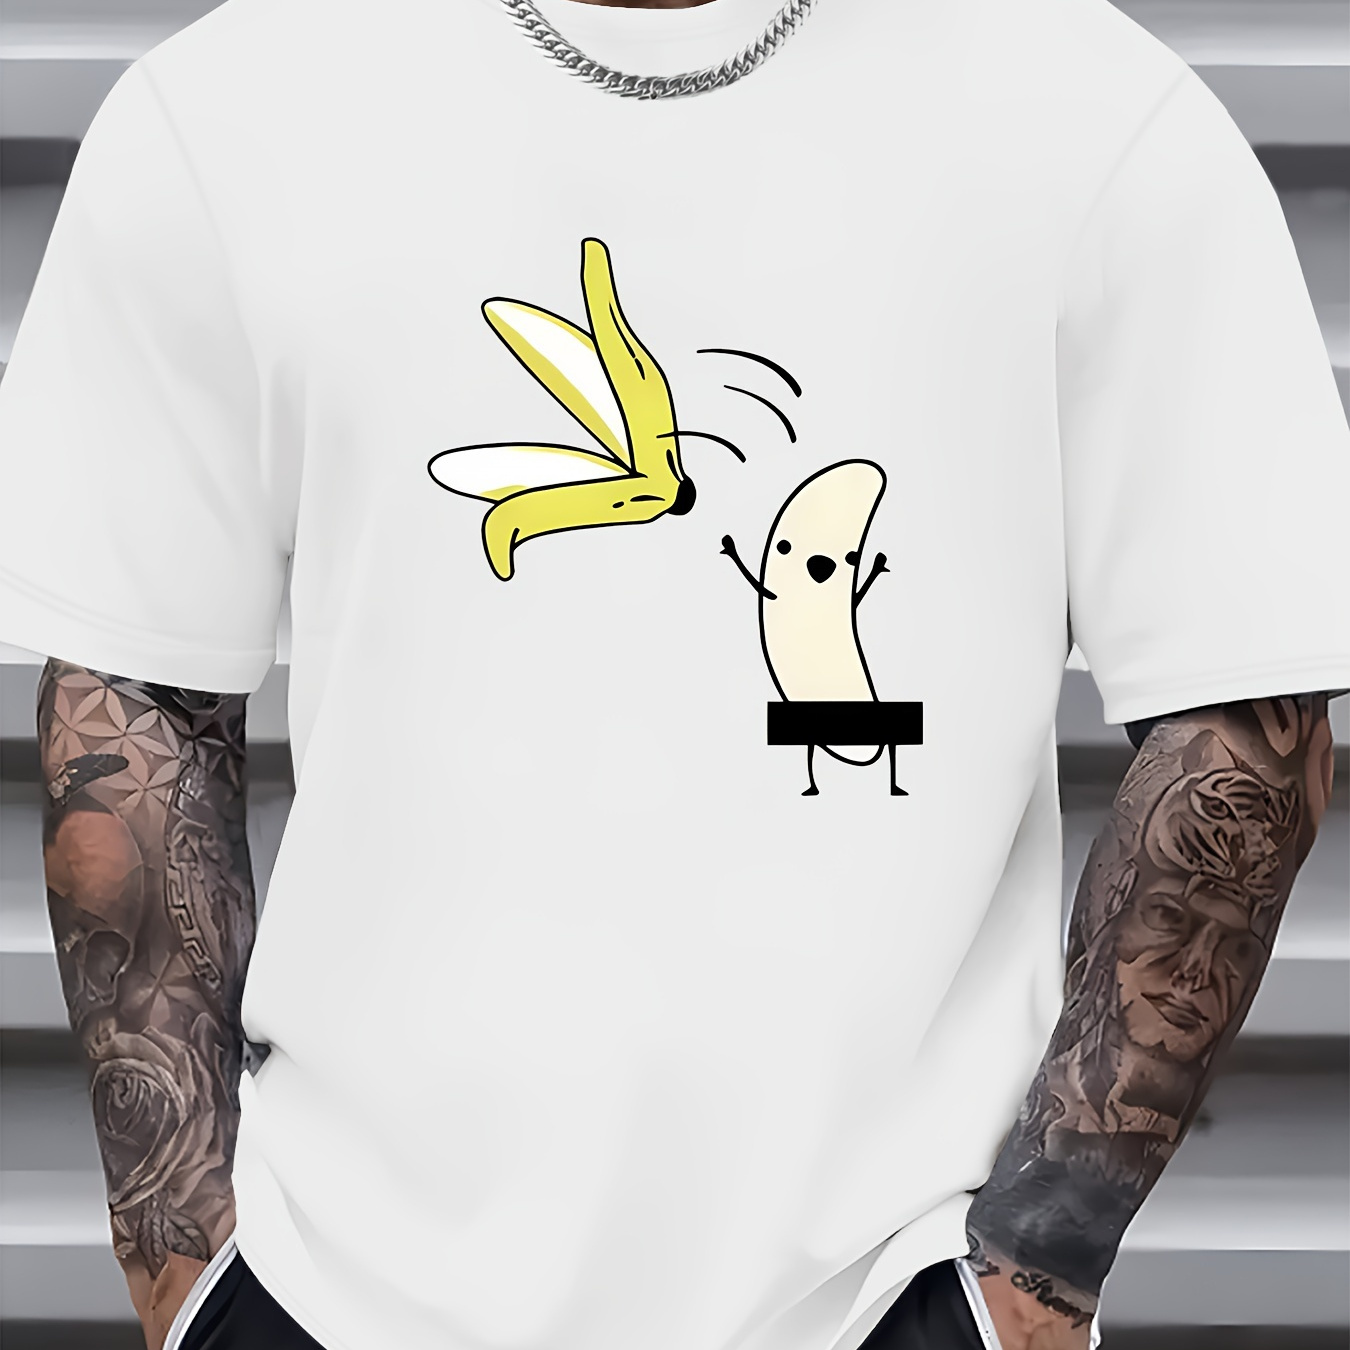 

Funny Banana Graphic Print Men's Creative Top, Casual Short Sleeve Crew Neck T-shirt, Men's Clothing For Summer Outdoor